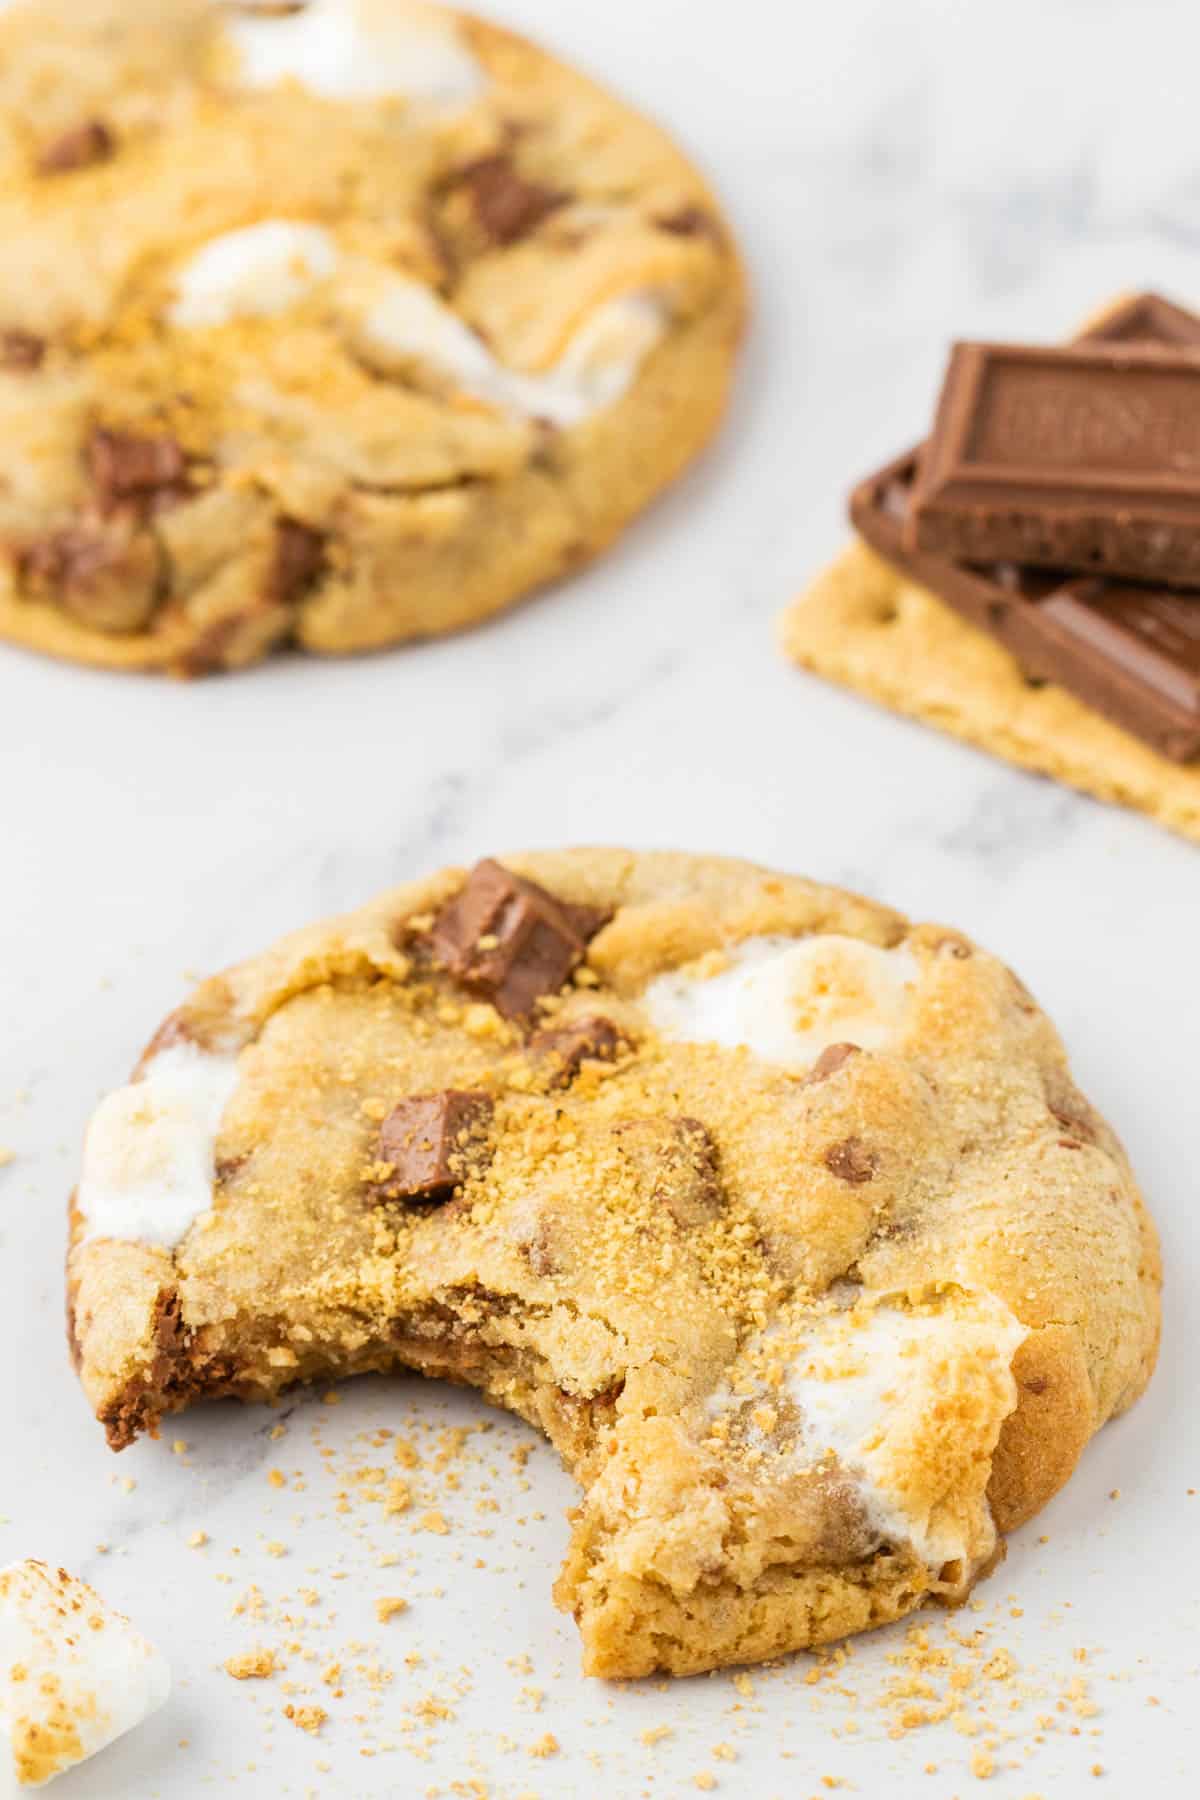 a smores cookie with a bite out of it with crumbs around it, another cookie in the background and a stack of graham cracker with hersheys chocolate on top